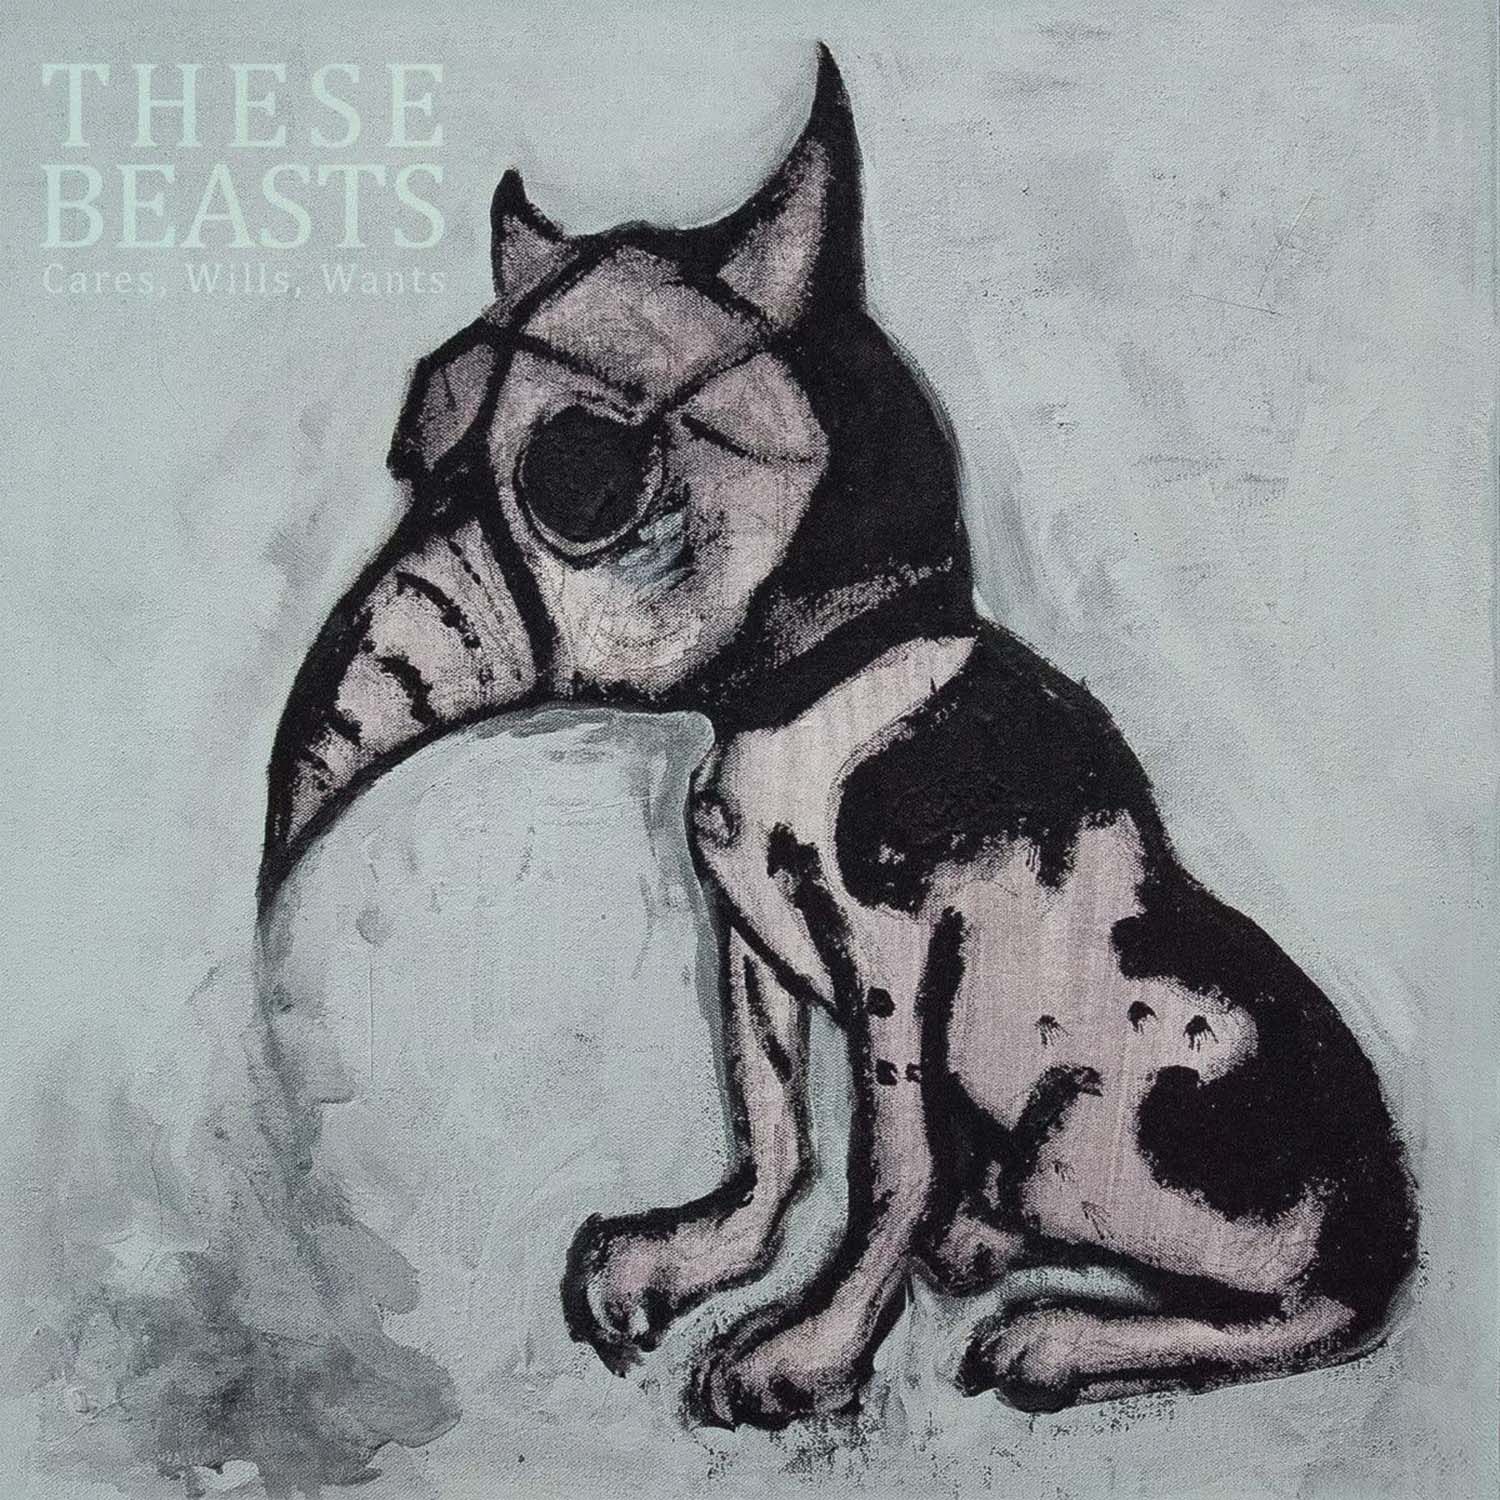 These Beasts - Cares. Wills, Wants